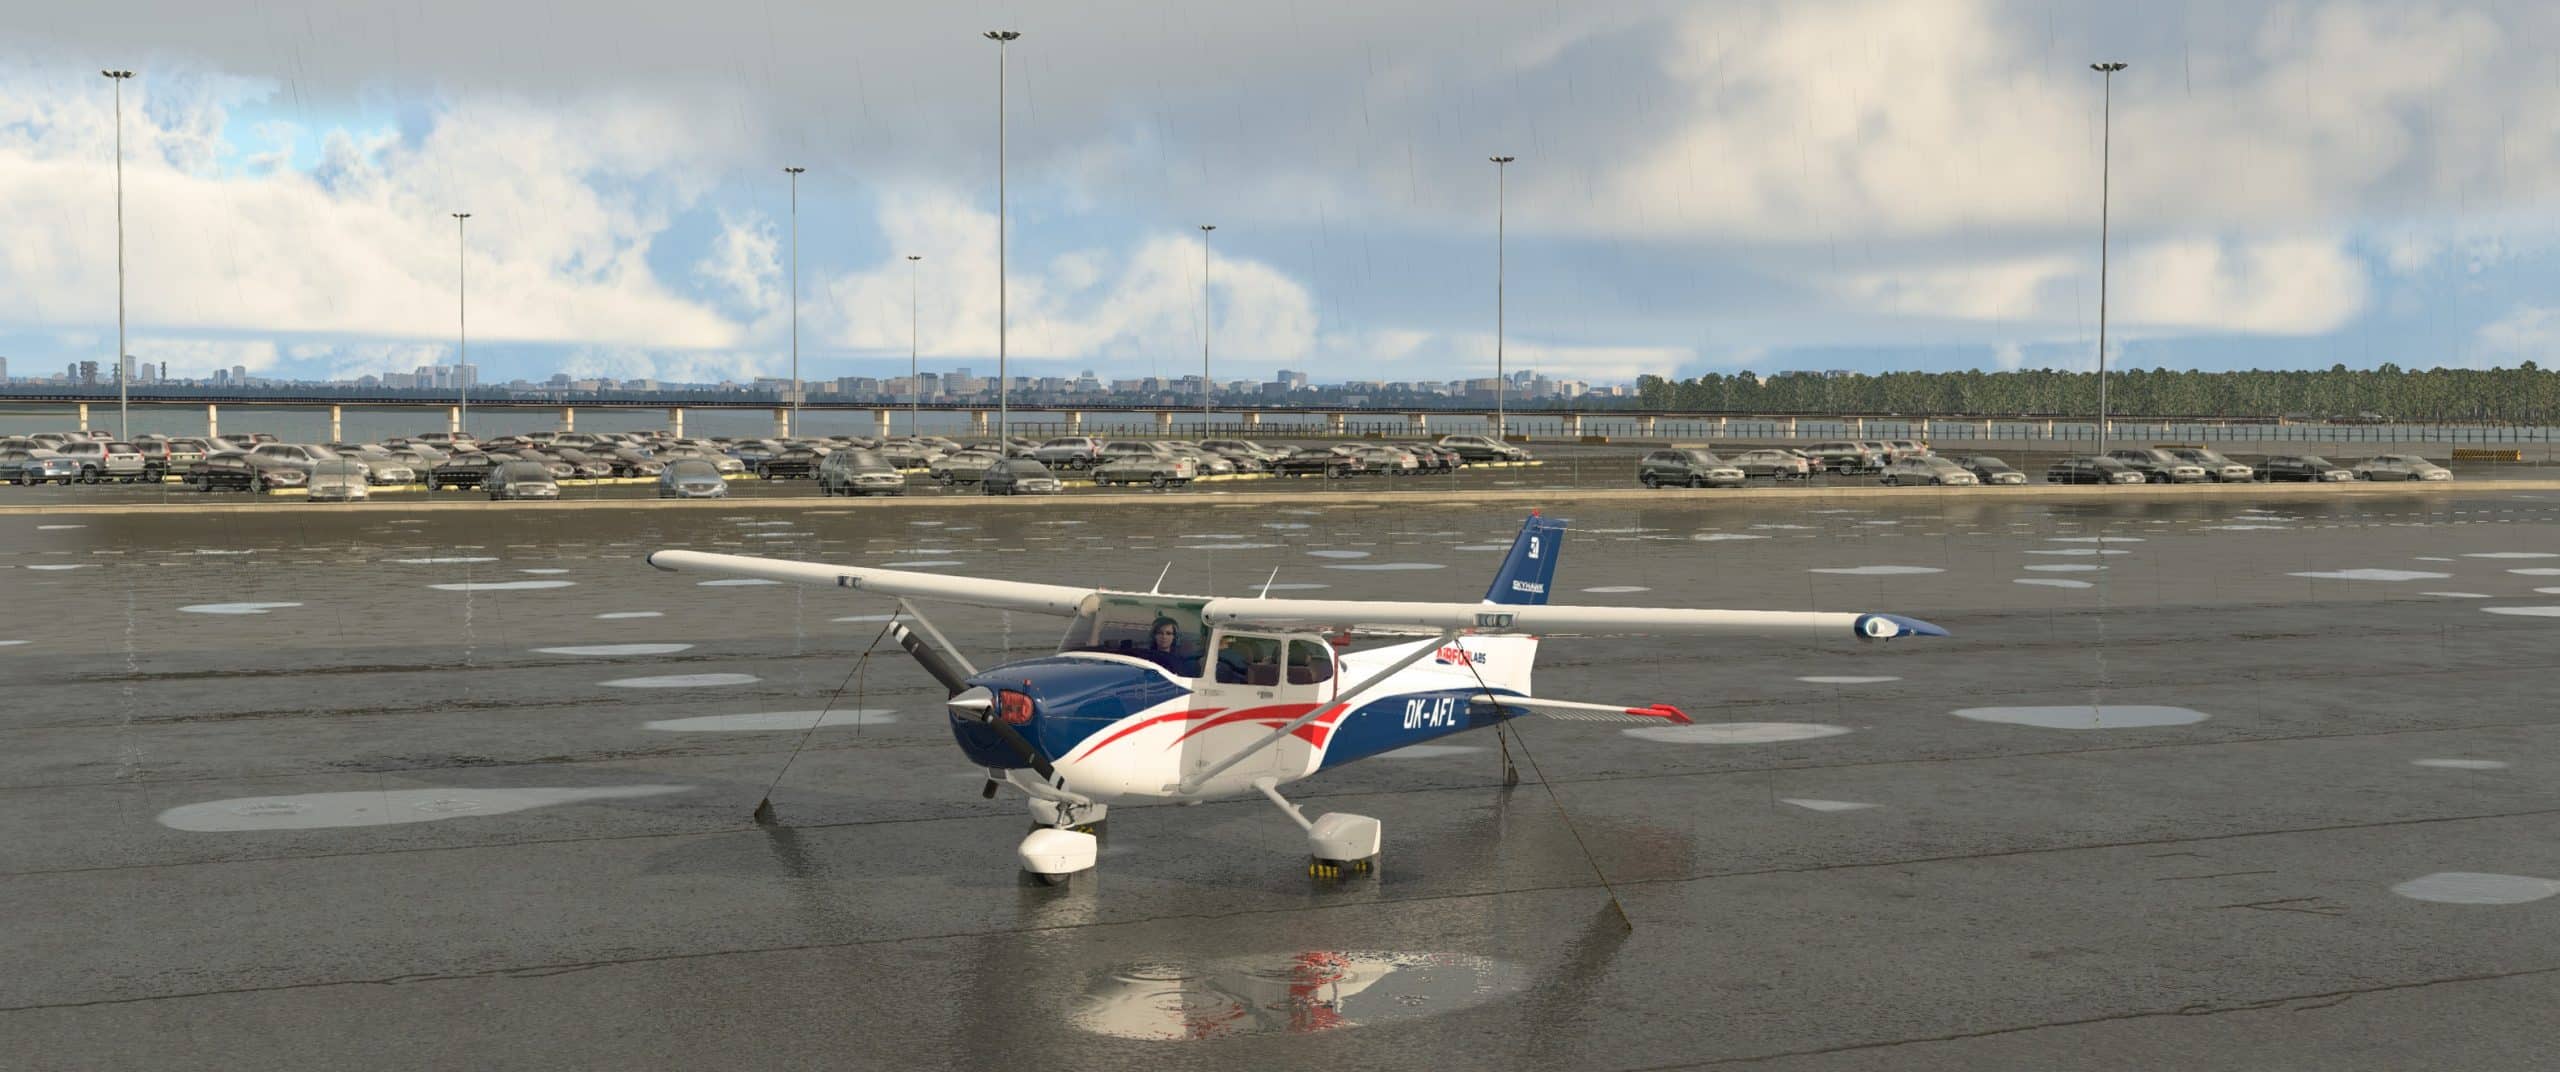 Airfoillabs Previews Cessna 172 for XP12 - AirFoilLabs, X-Plane